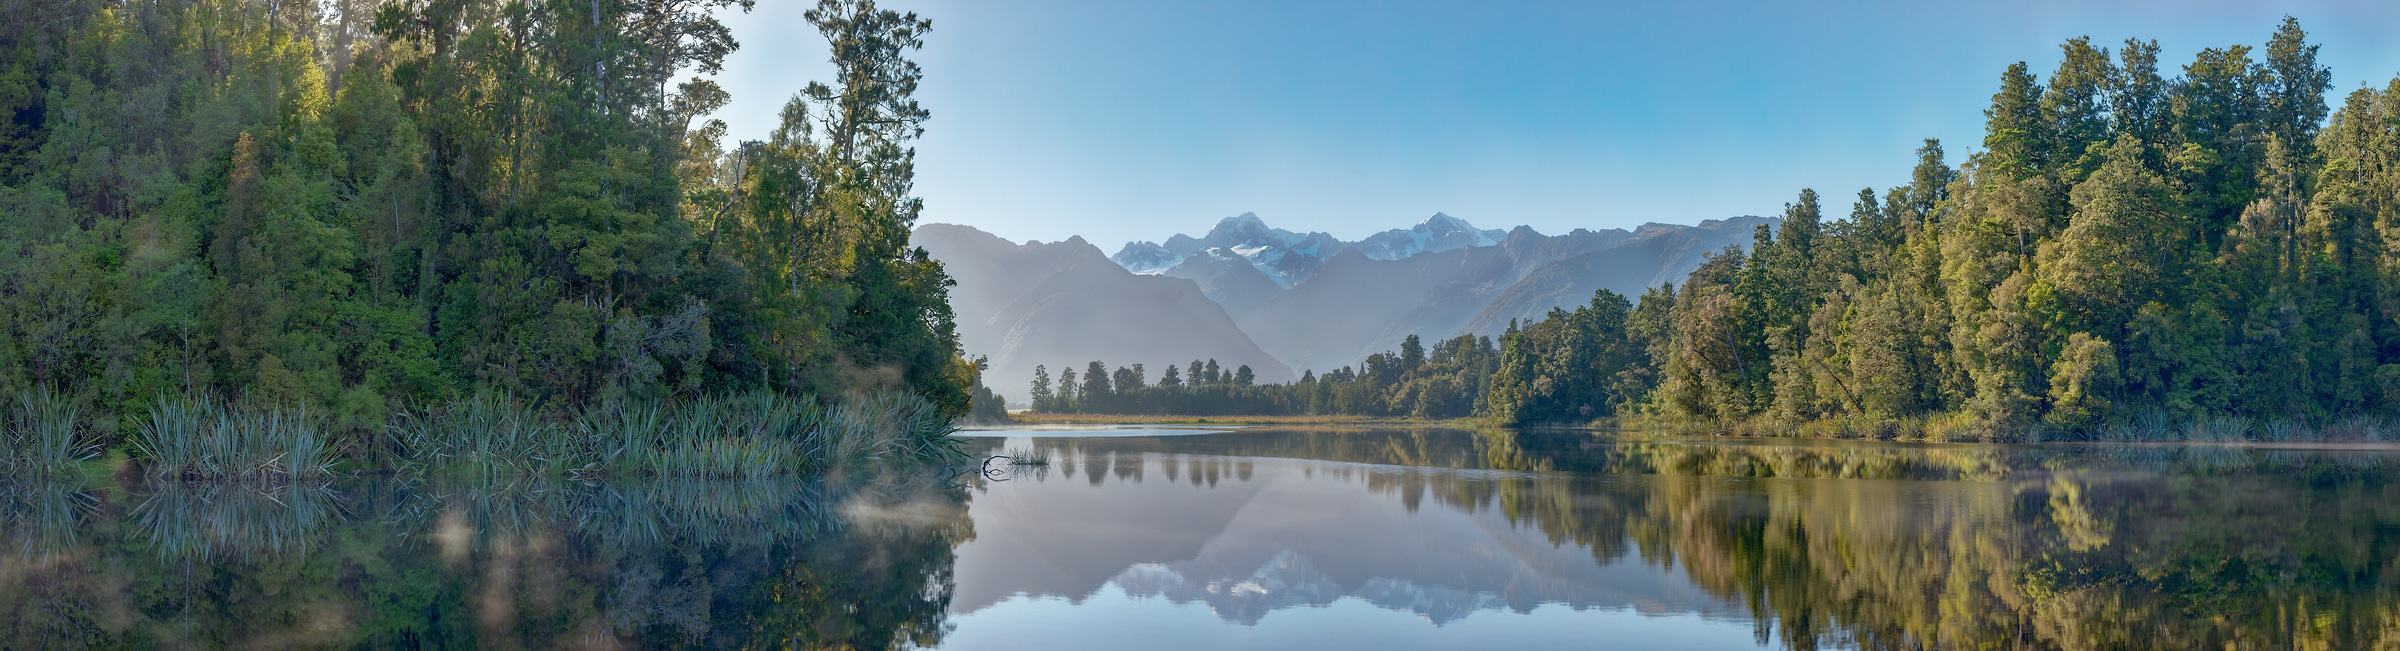 506 megapixels! A very high resolution, large-format VAST photo print of a lake in front of a mountain range; landscape photograph created by John Freeman in Lake Matheson, South Island, New Zealand.